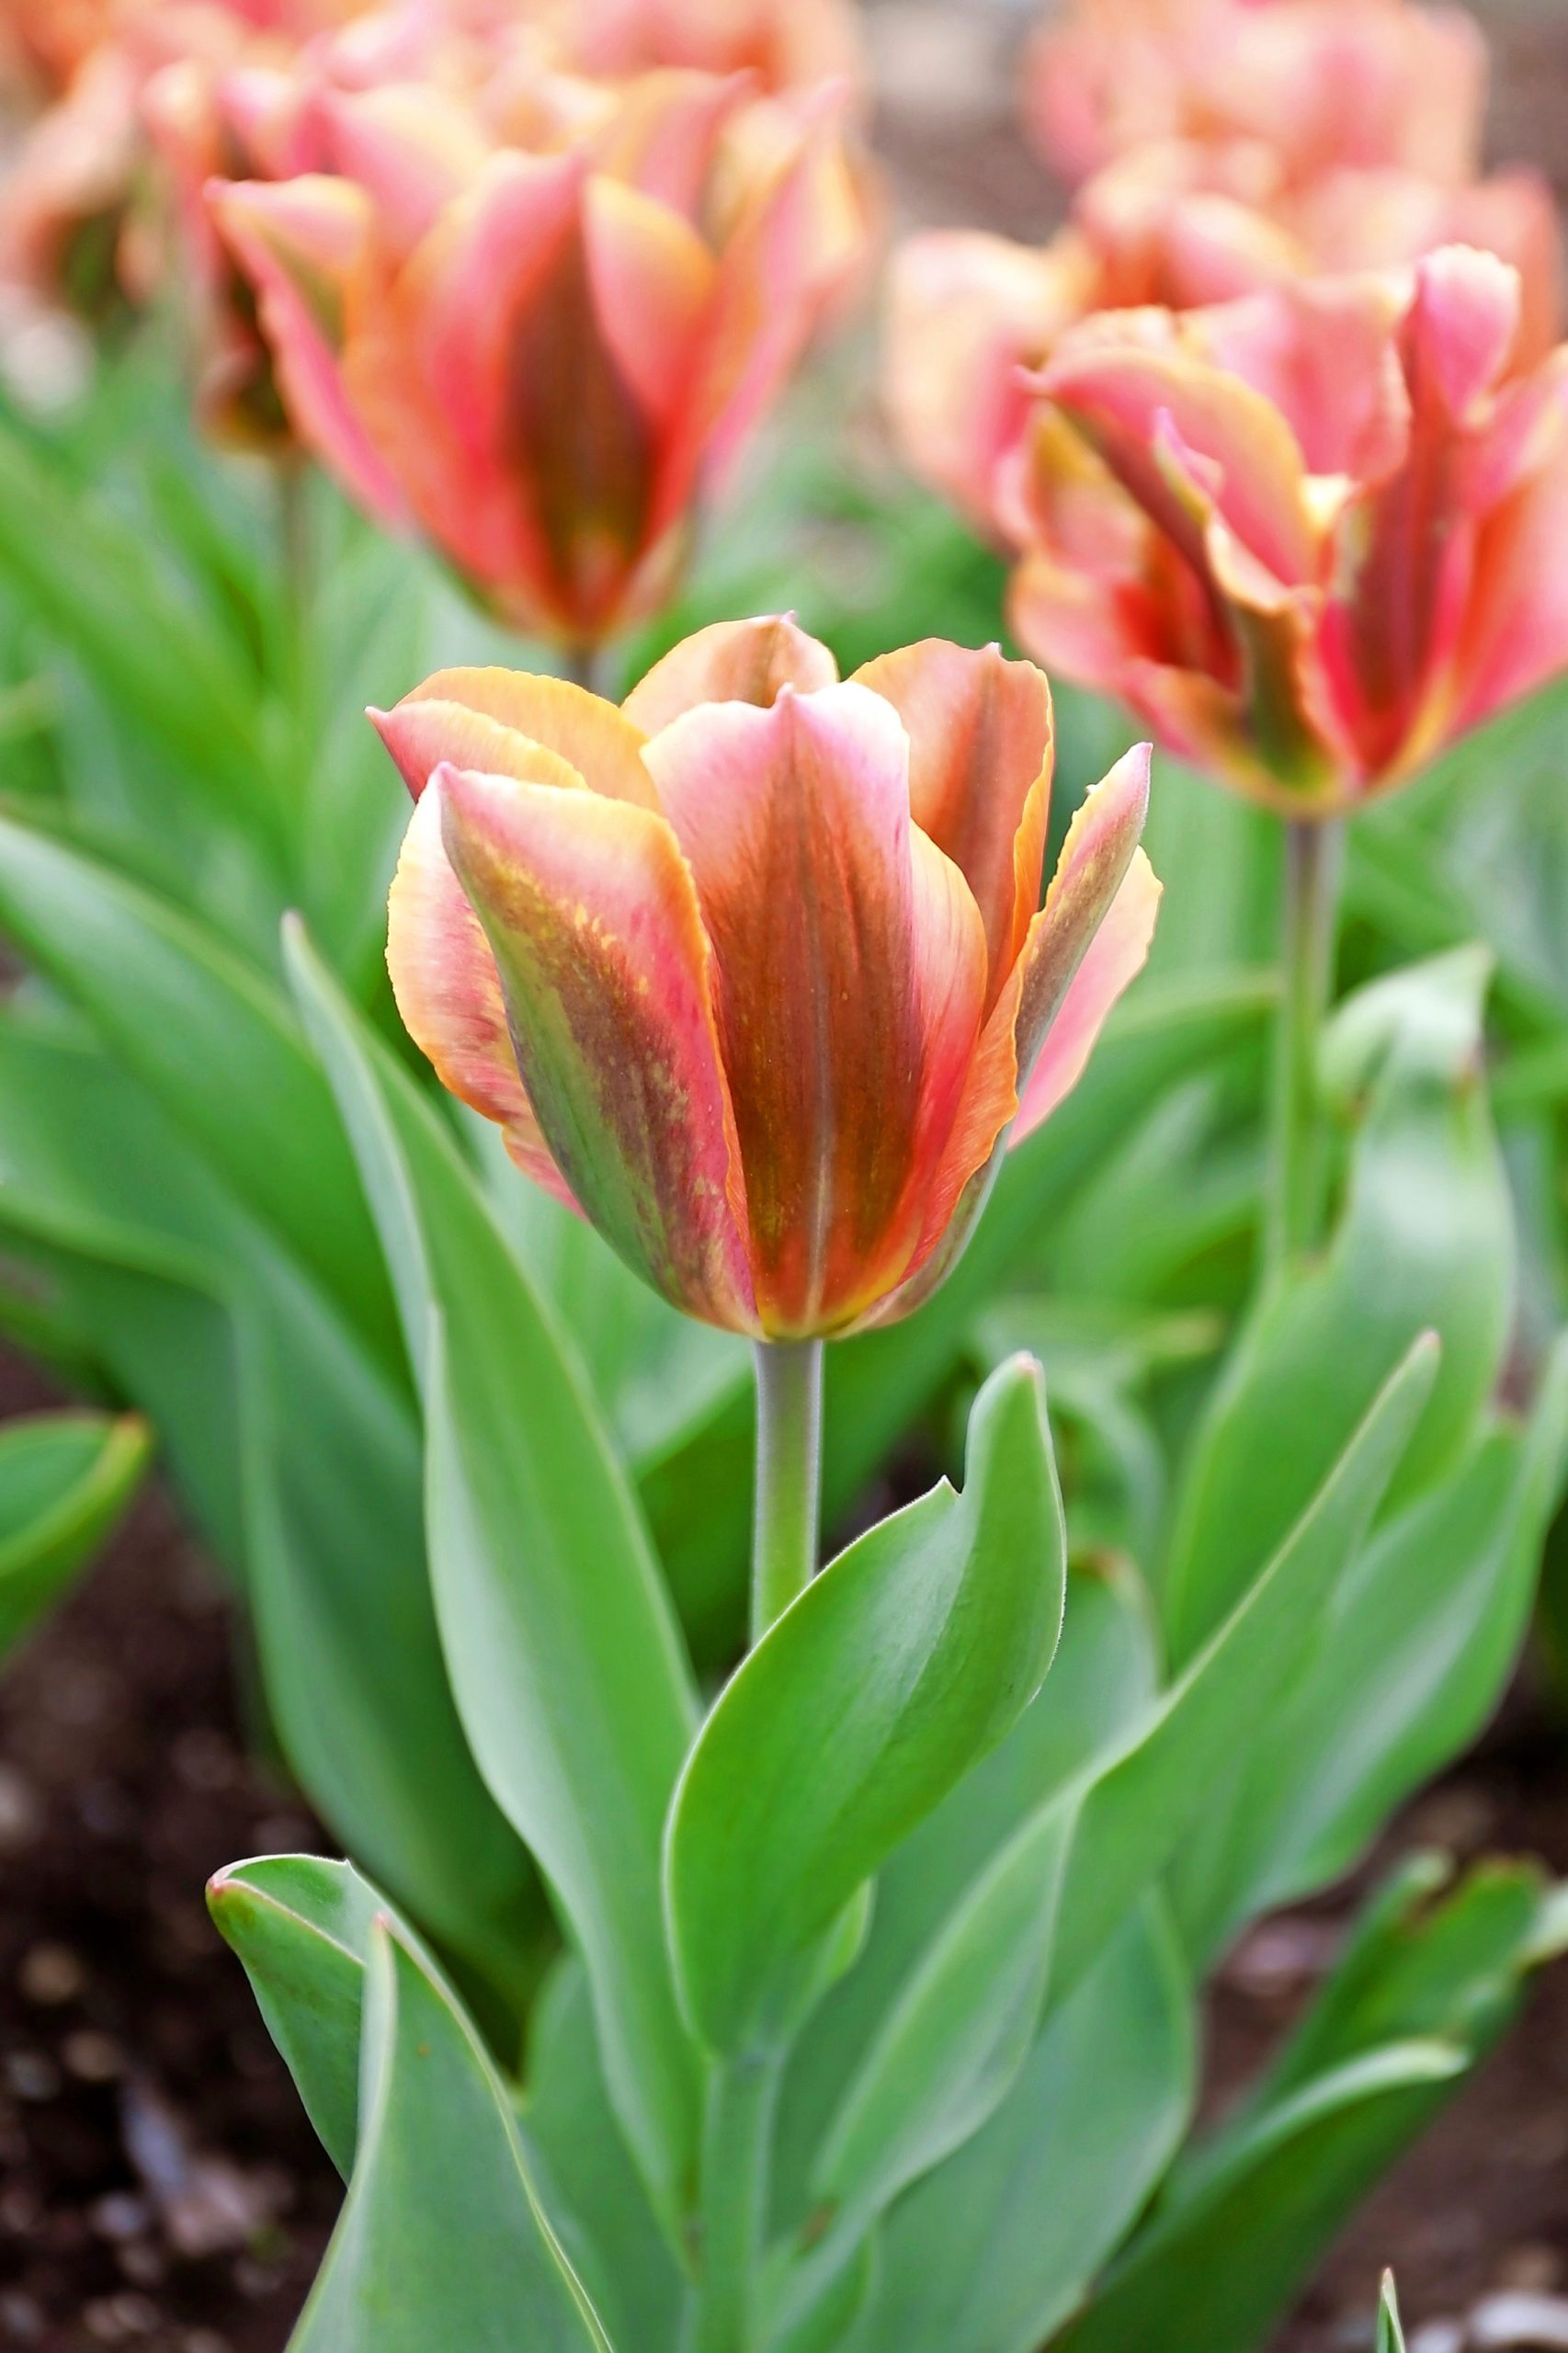 Top 10 Showstopping Tulips Bulbs To Plant For Spring Color